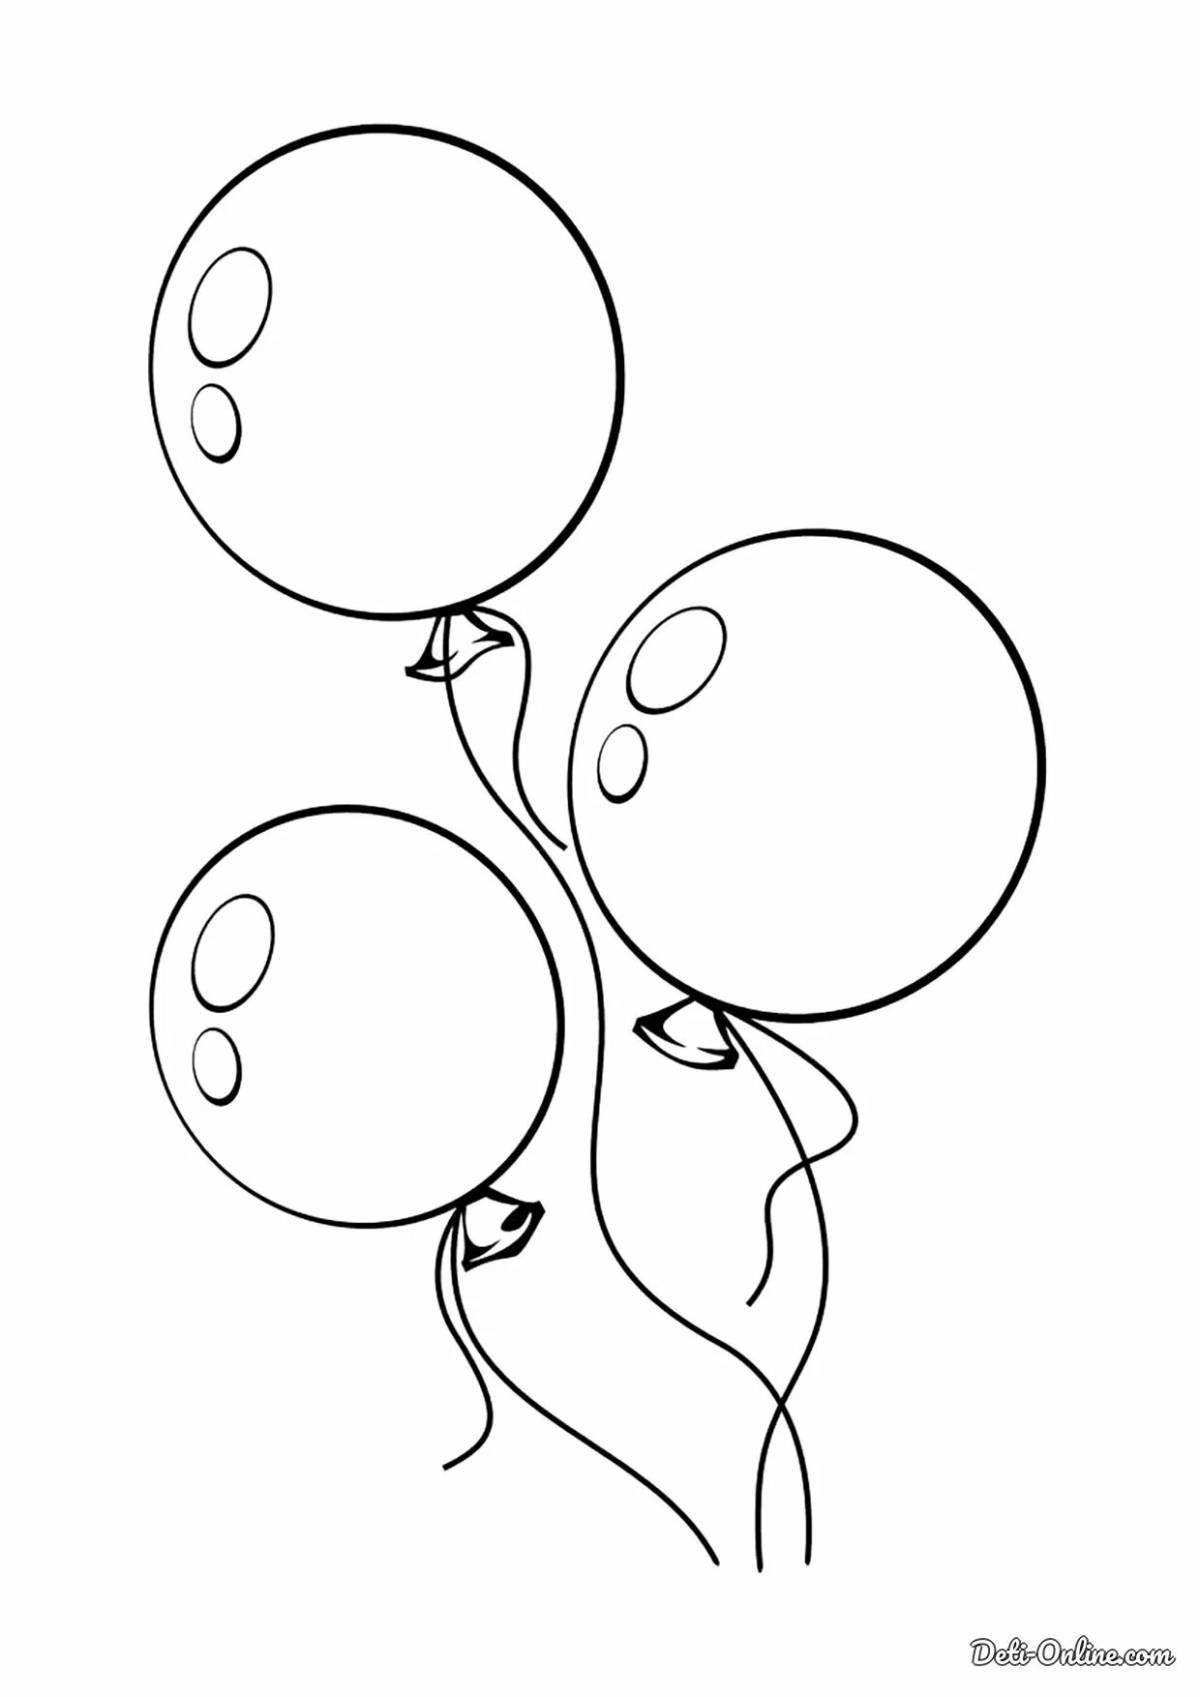 Fantastic coloring book with balloons for kids